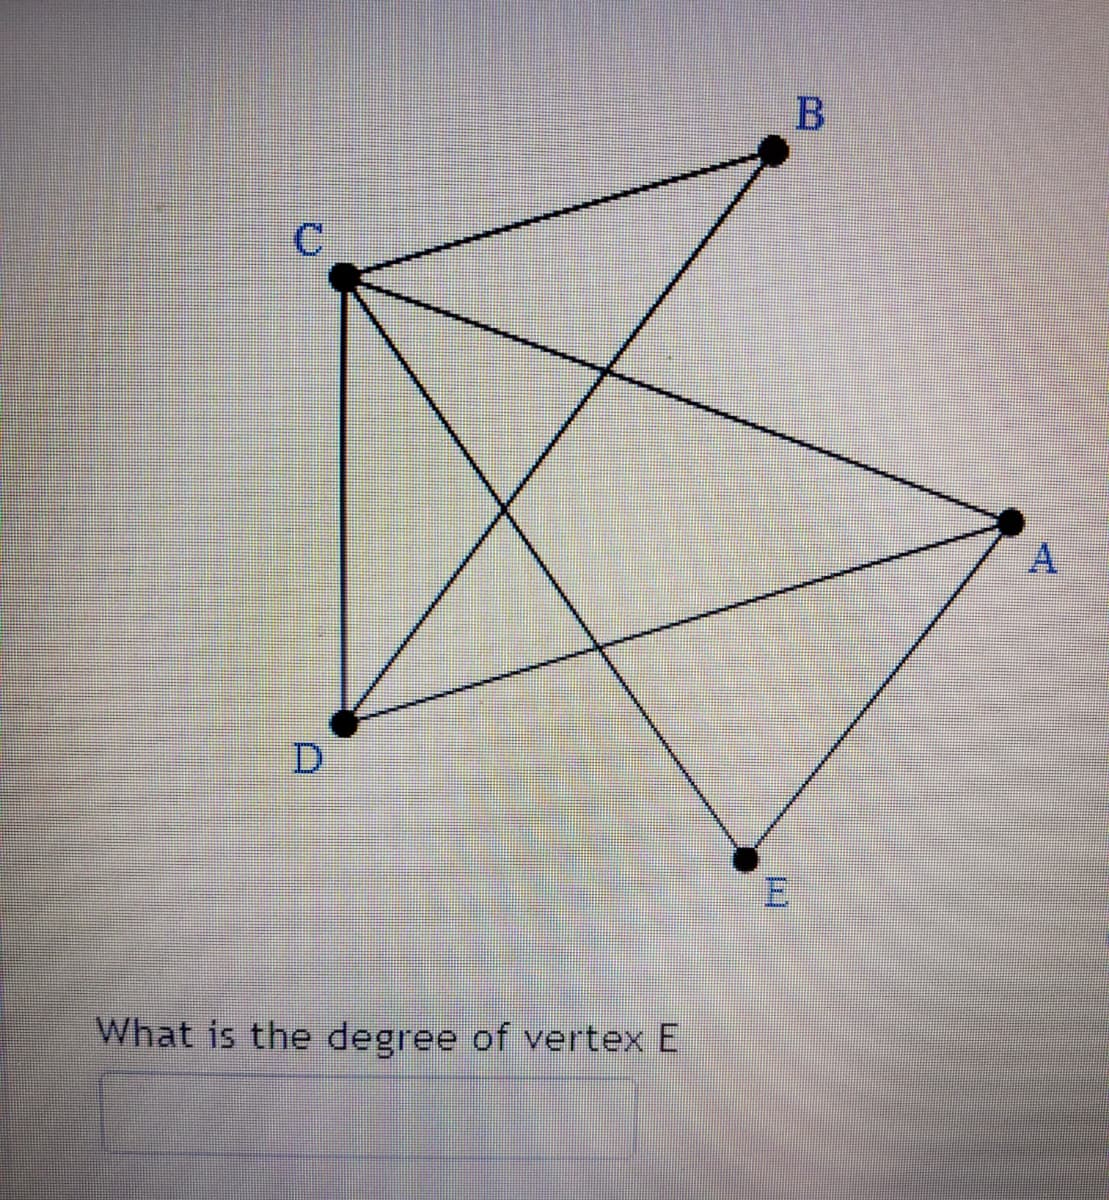 B
C
A
What is the degree of vertex E
